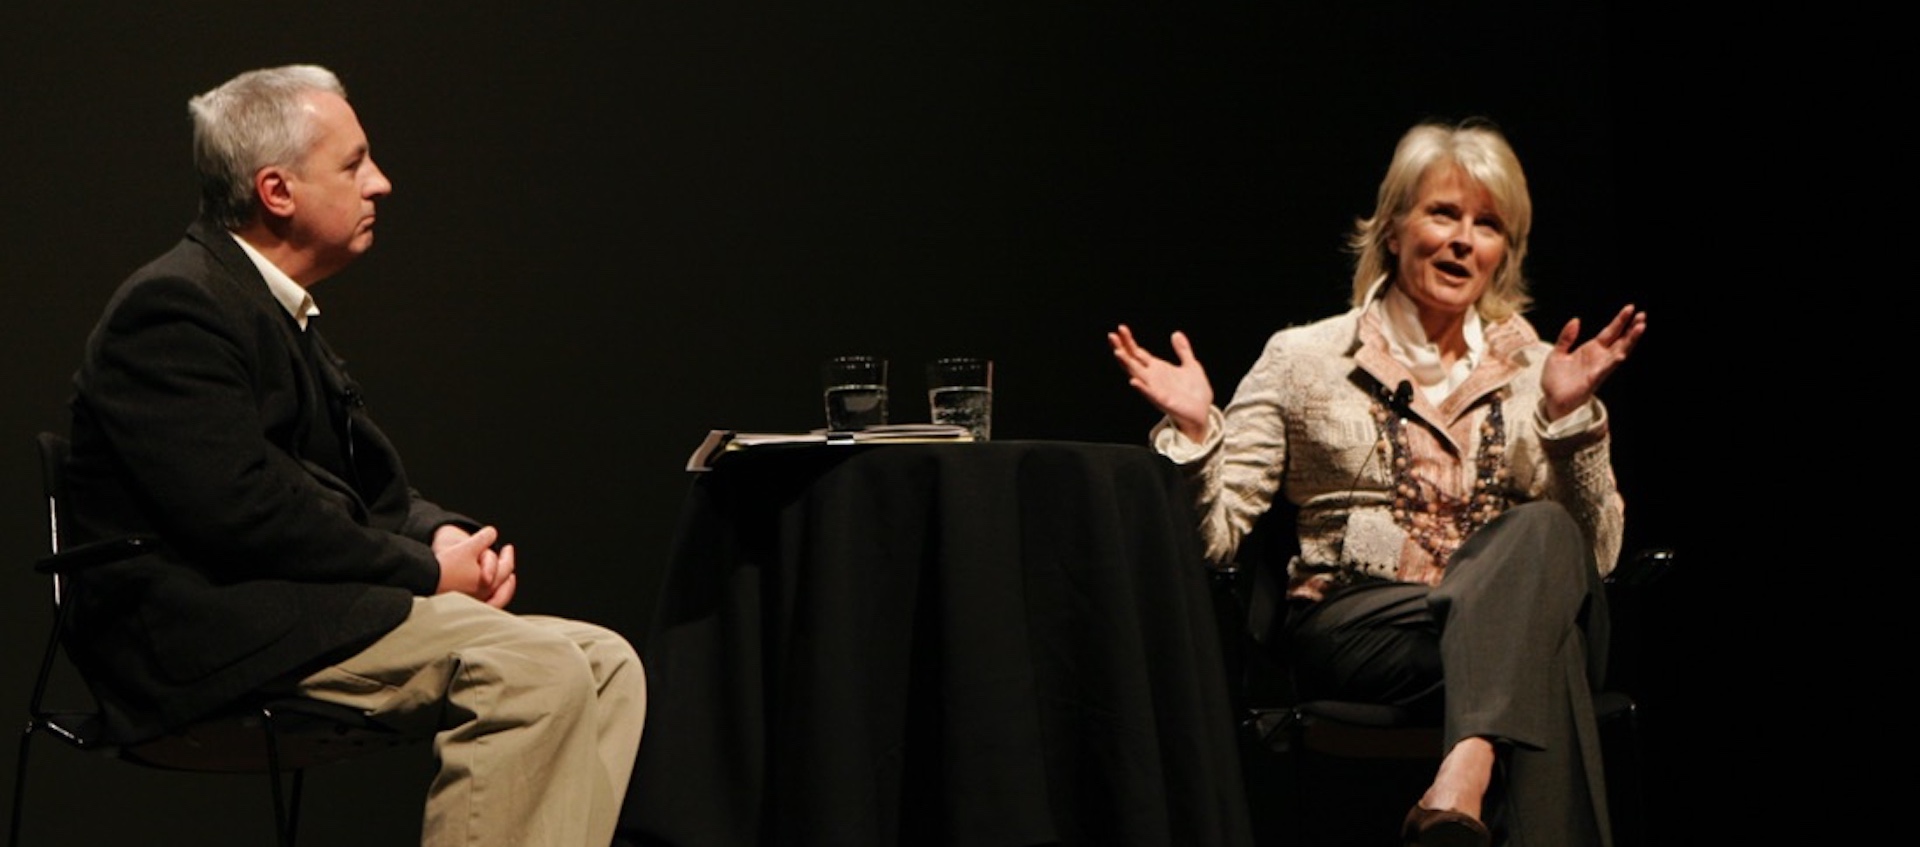 Wexner Center for the Arts curator Bill Horrigan faces actress Candace Bergen during a discussion on stage at Mershon Auditorium 